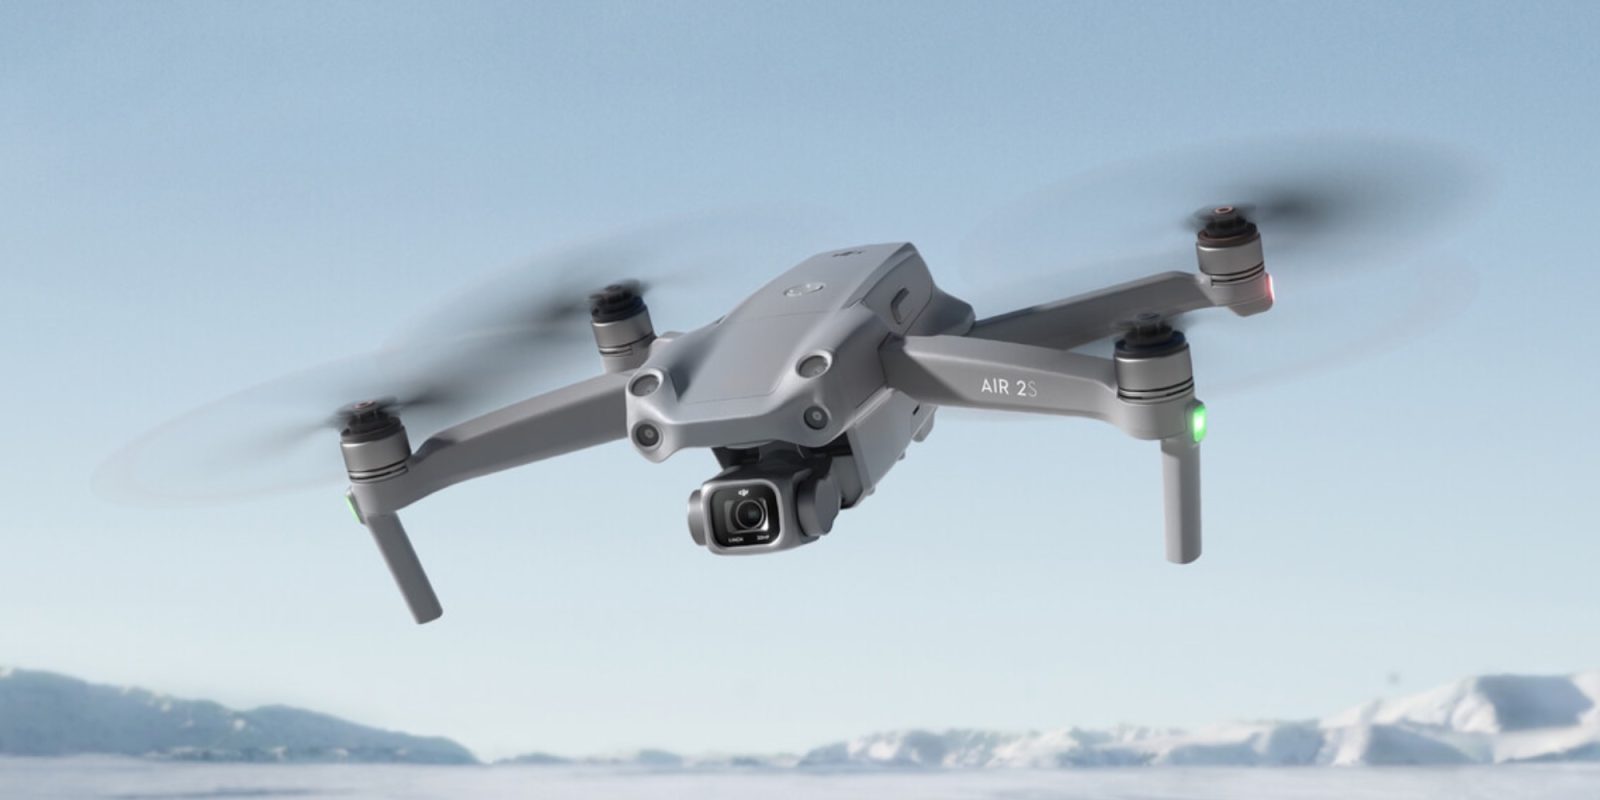 New DJI Air 2S firmware adds support for EU C1 certification